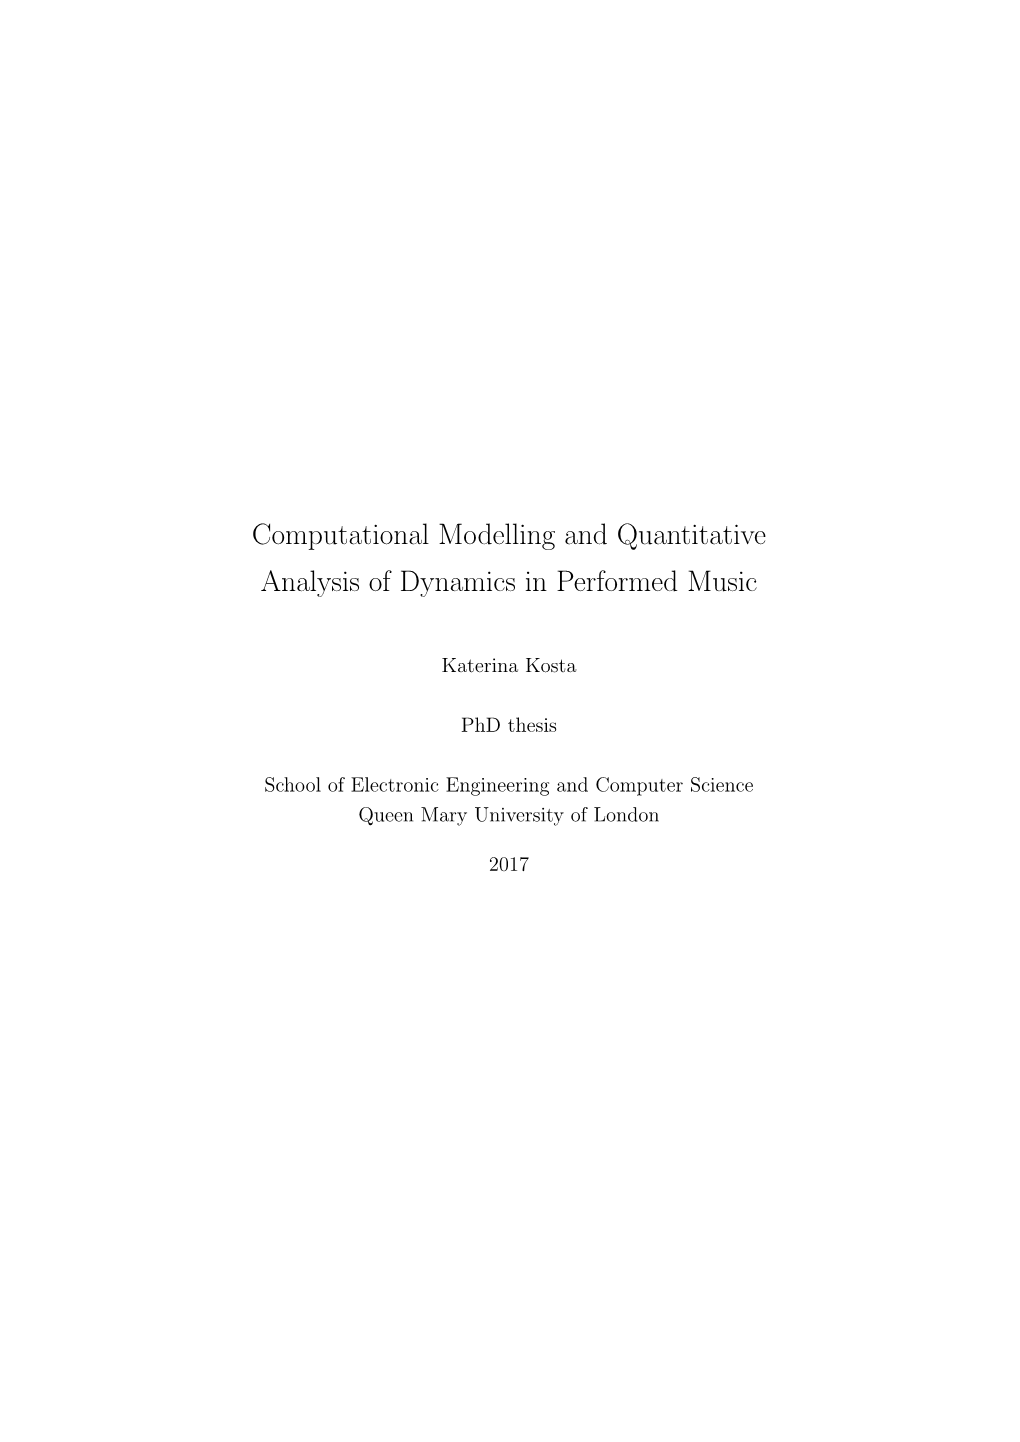 Computational Modelling and Quantitative Analysis of Dynamics in Performed Music